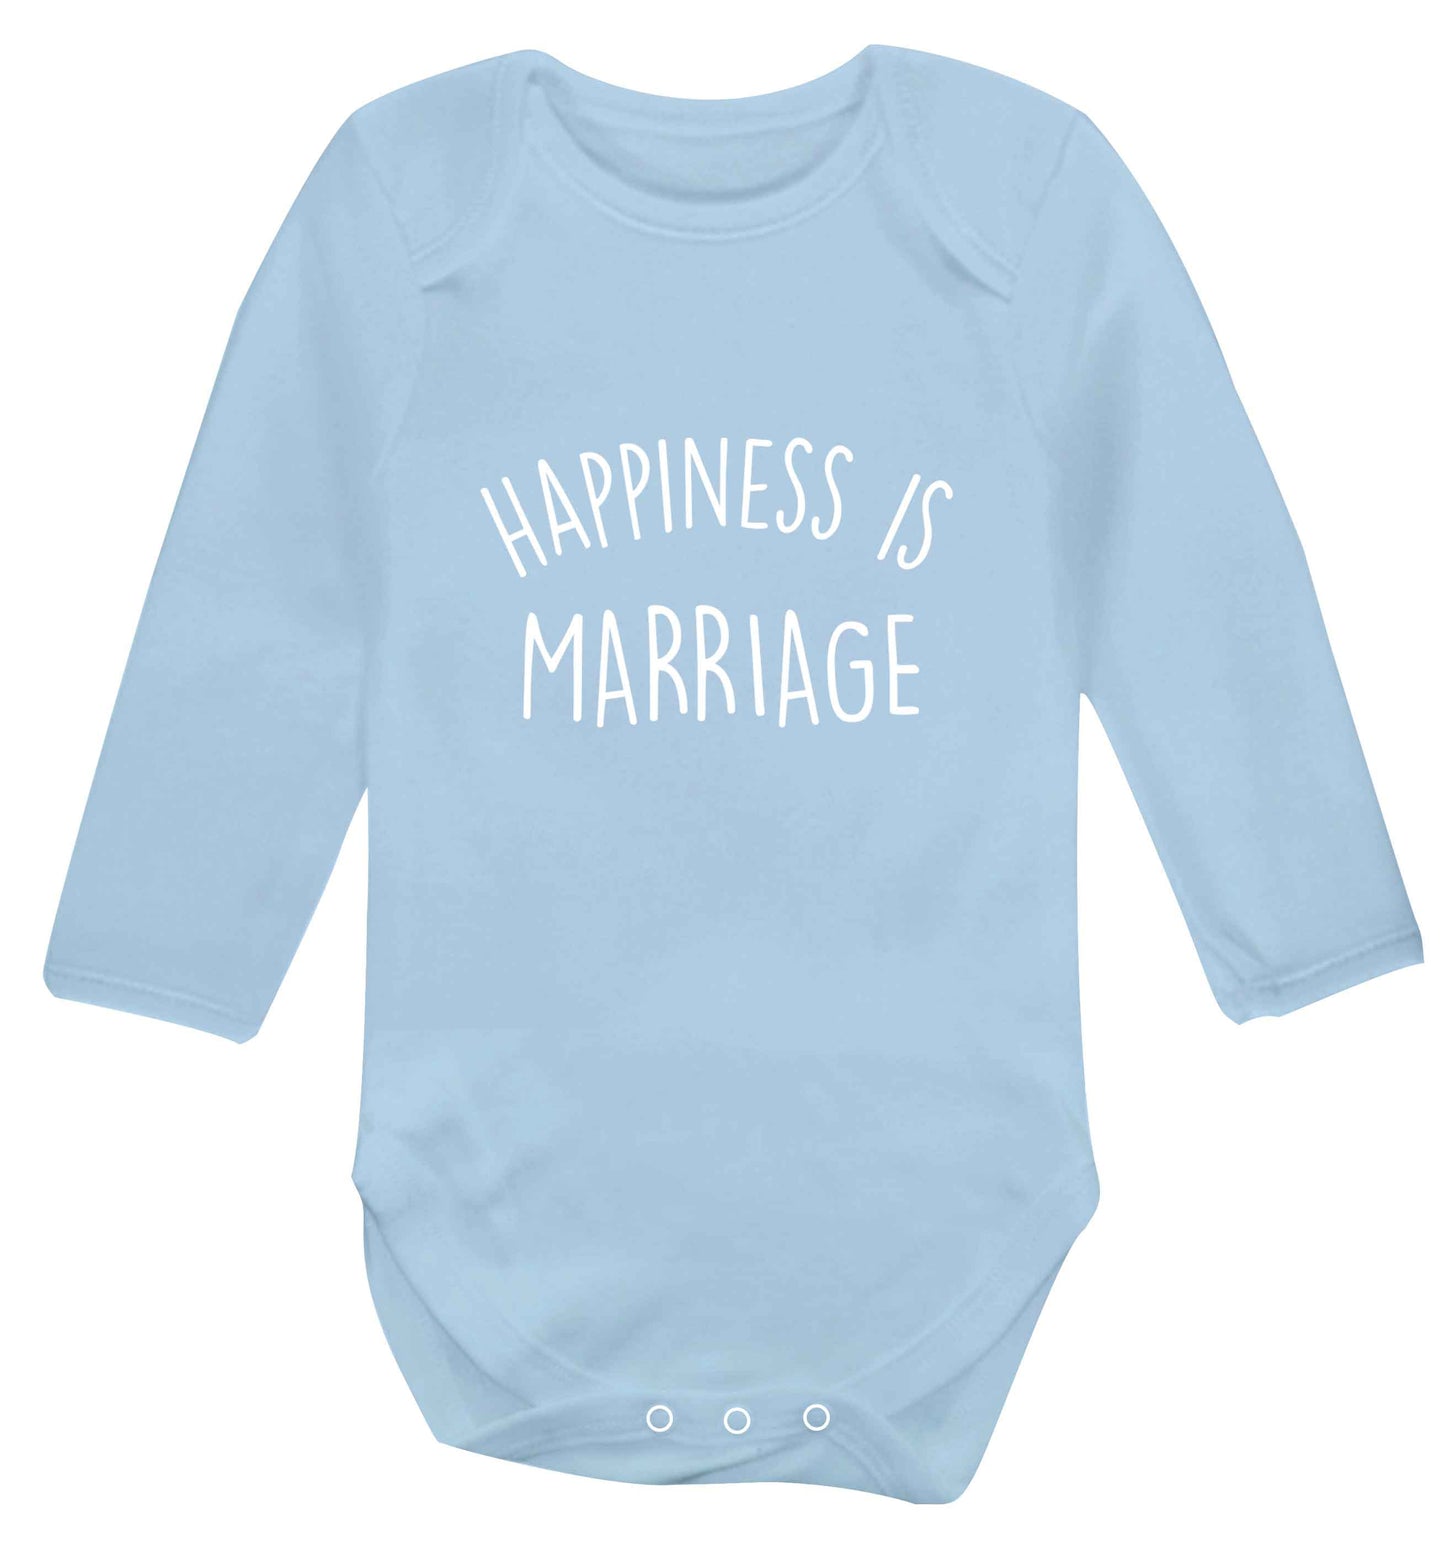 Happiness is wedding planning baby vest long sleeved pale blue 6-12 months